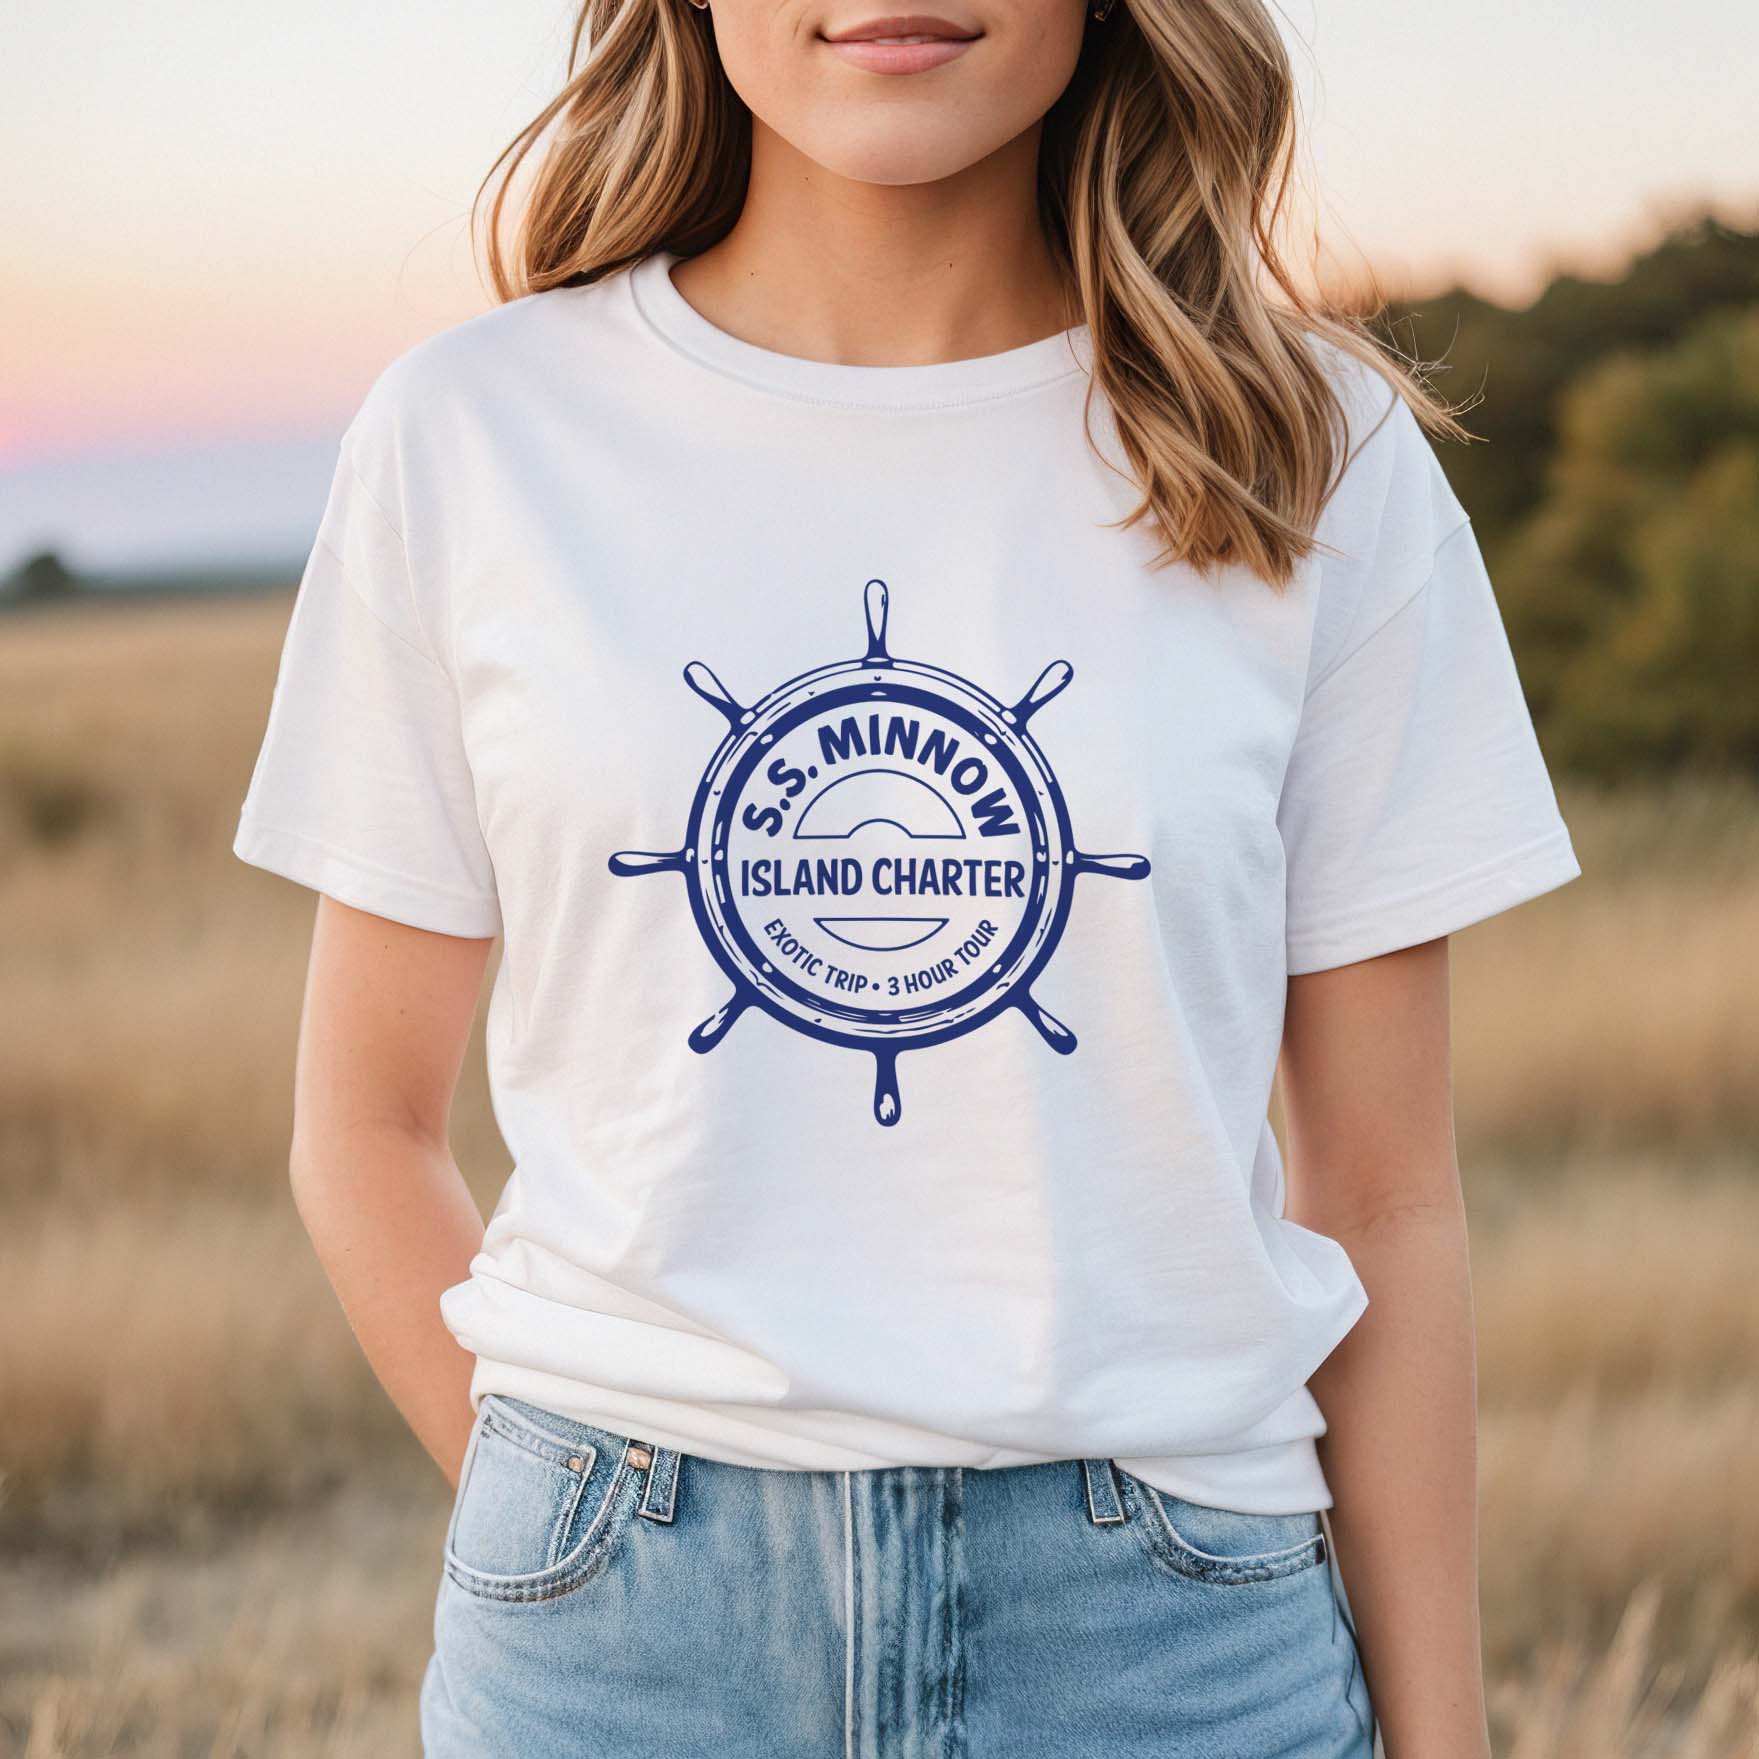 SS Minnow unisex t shirt white with navy print